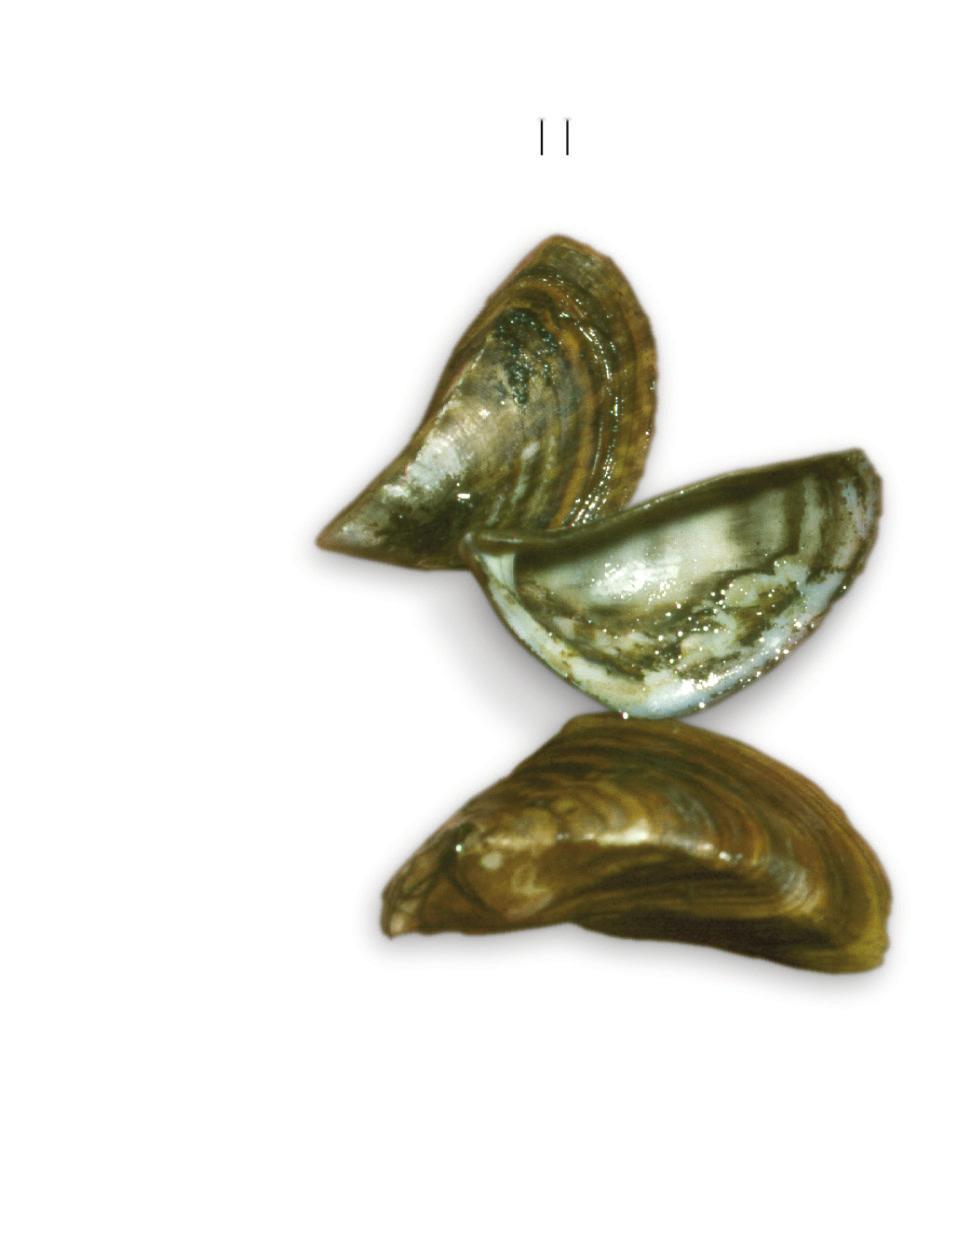 They range in size from microscopic up to about two inches long. The zebra mussel is nearly triangular in shape and the quagga mussel is more rounded.